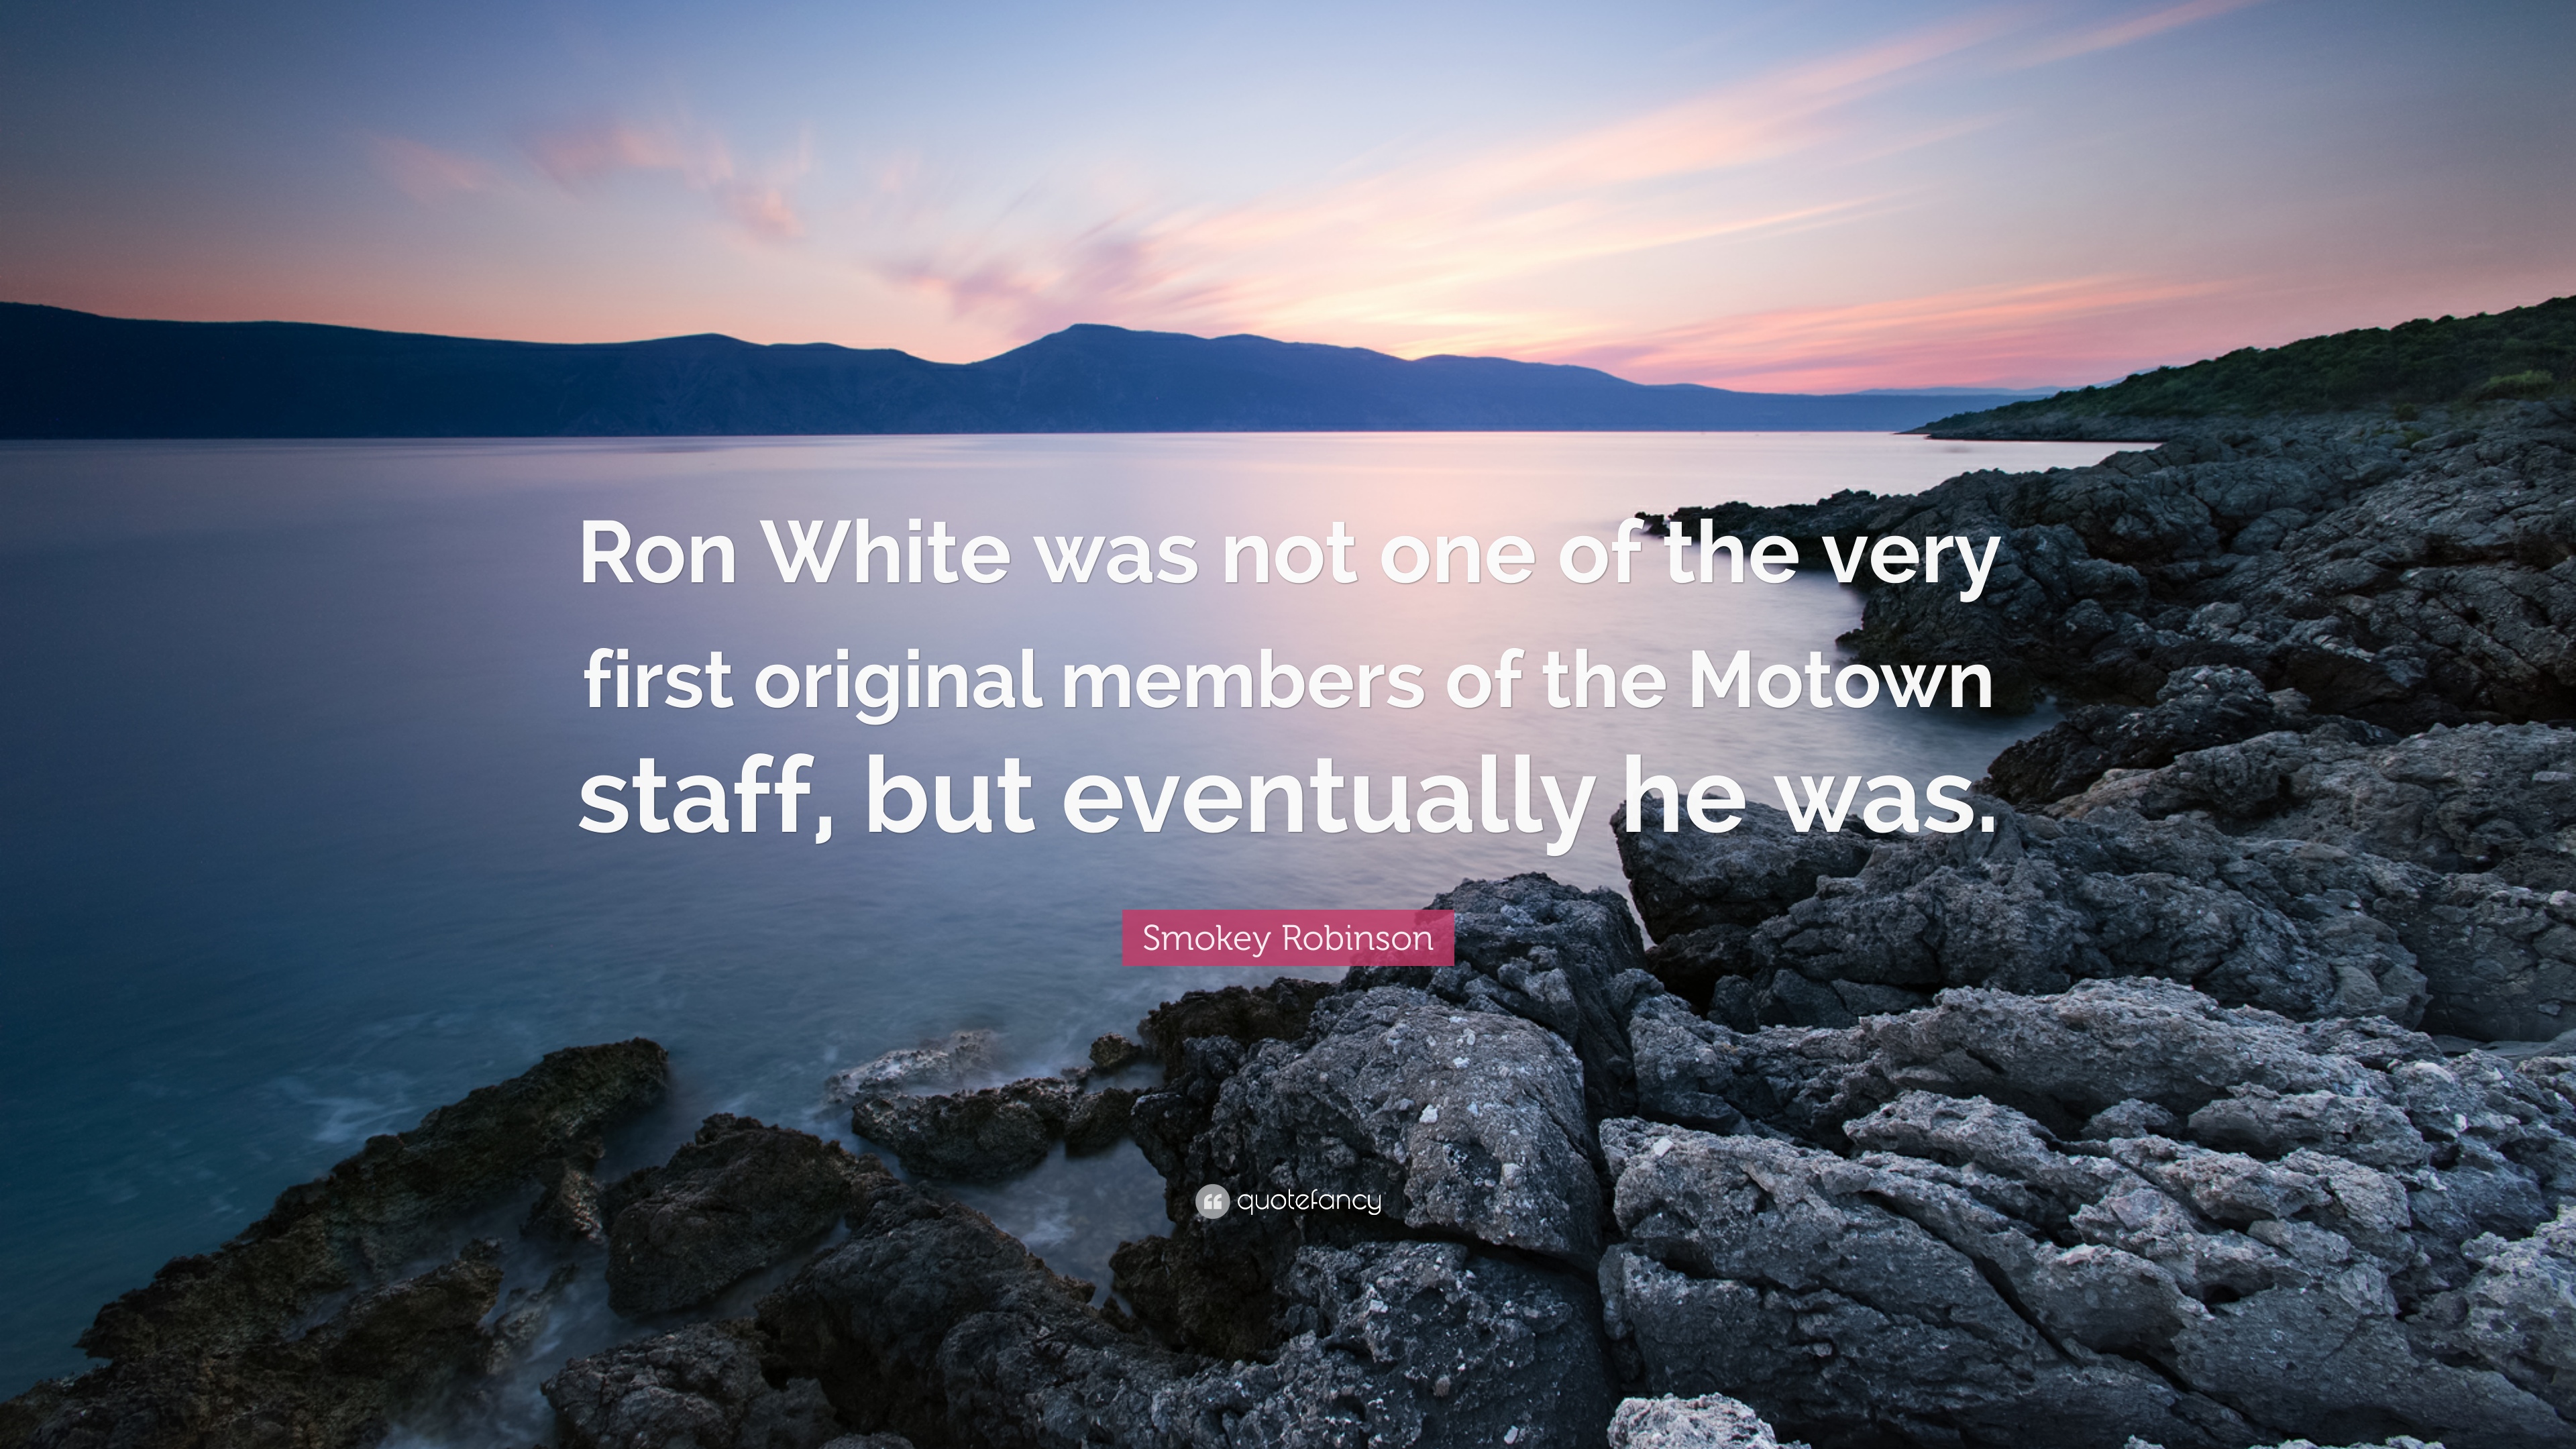 Smokey Robinson Quote: “Ron White was not one of the very first